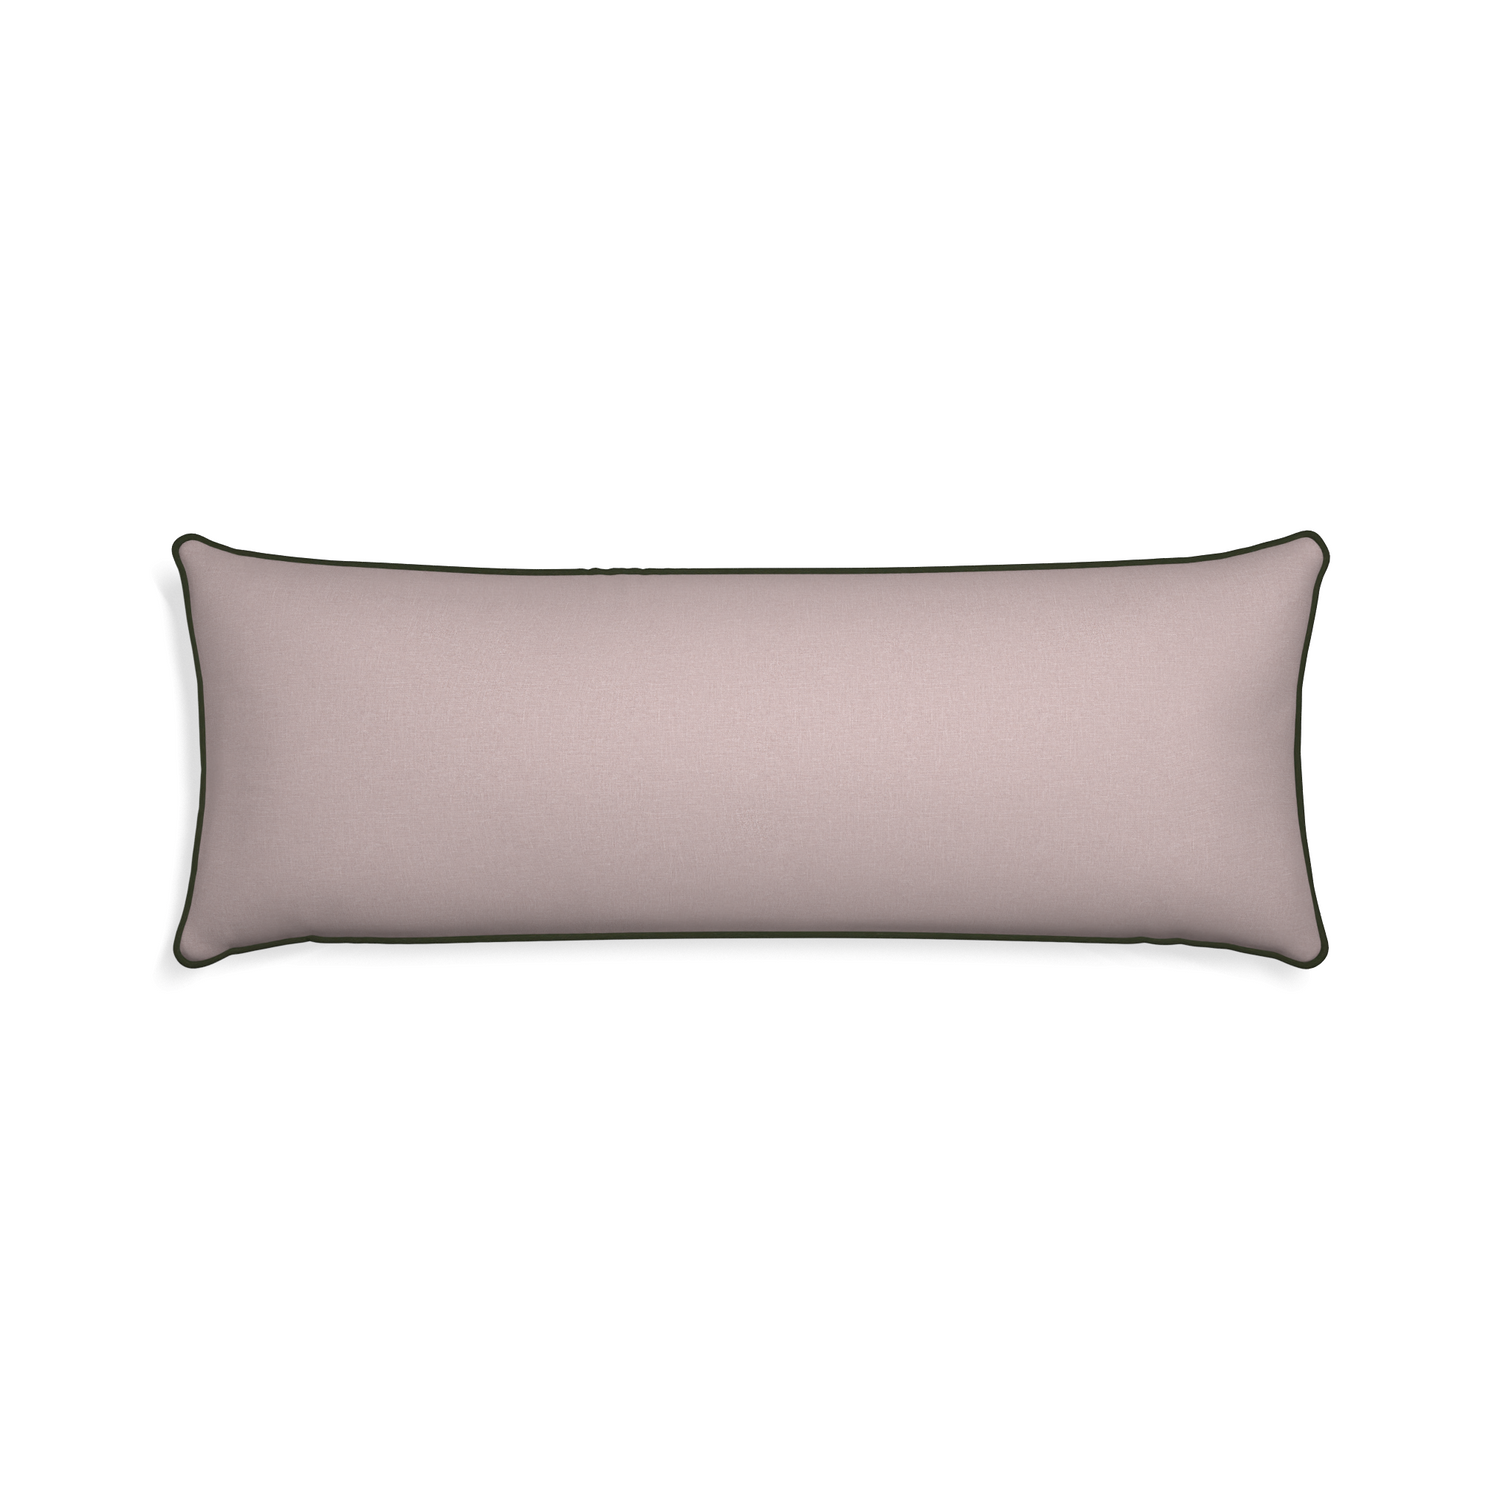 Xl-lumbar orchid custom mauve pinkpillow with f piping on white background